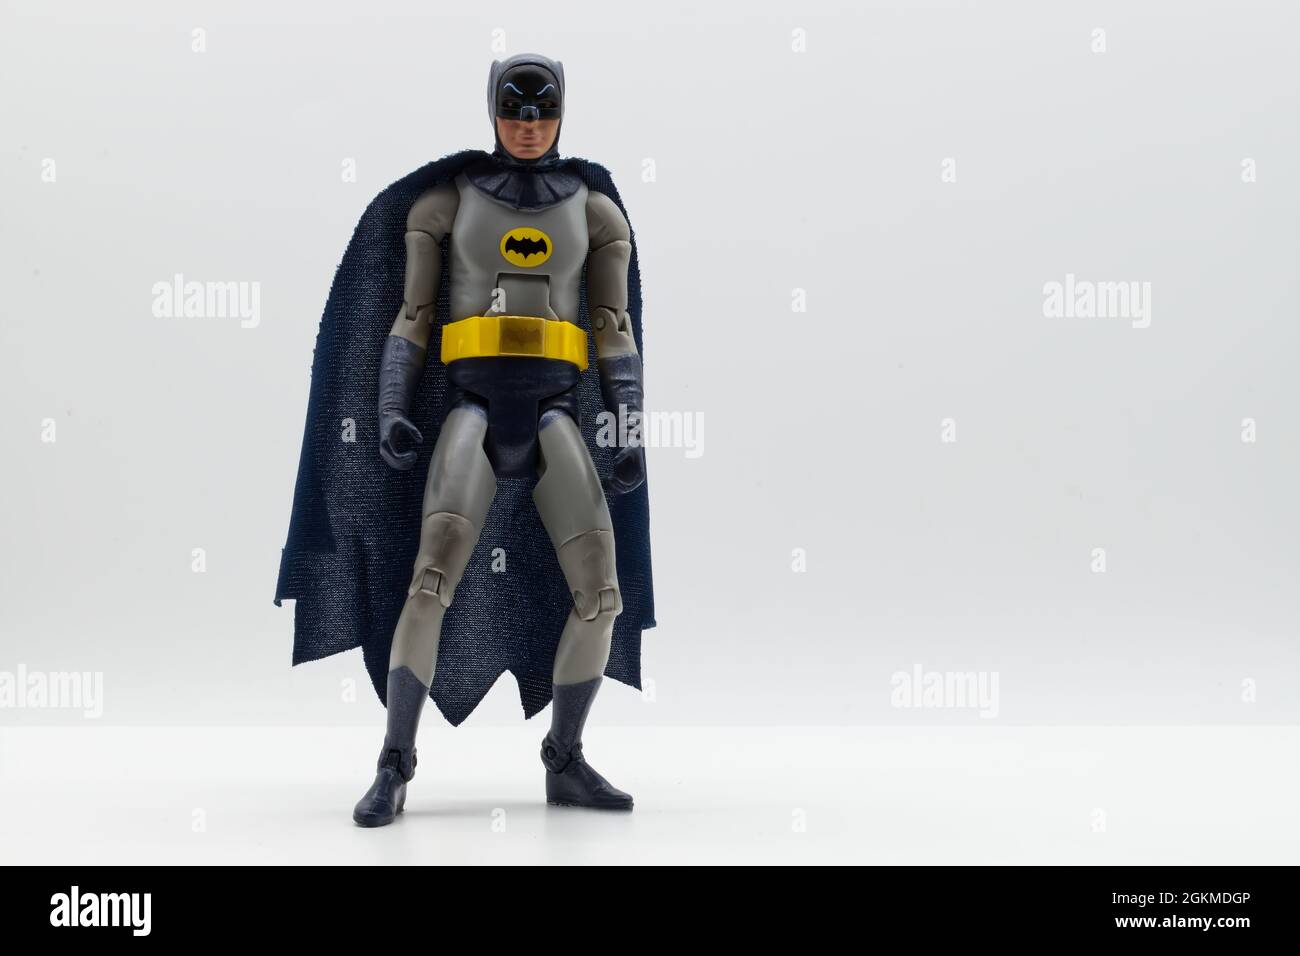 Batman tv series action figure isolated on white background. Batman from DC comics. Stock Photo